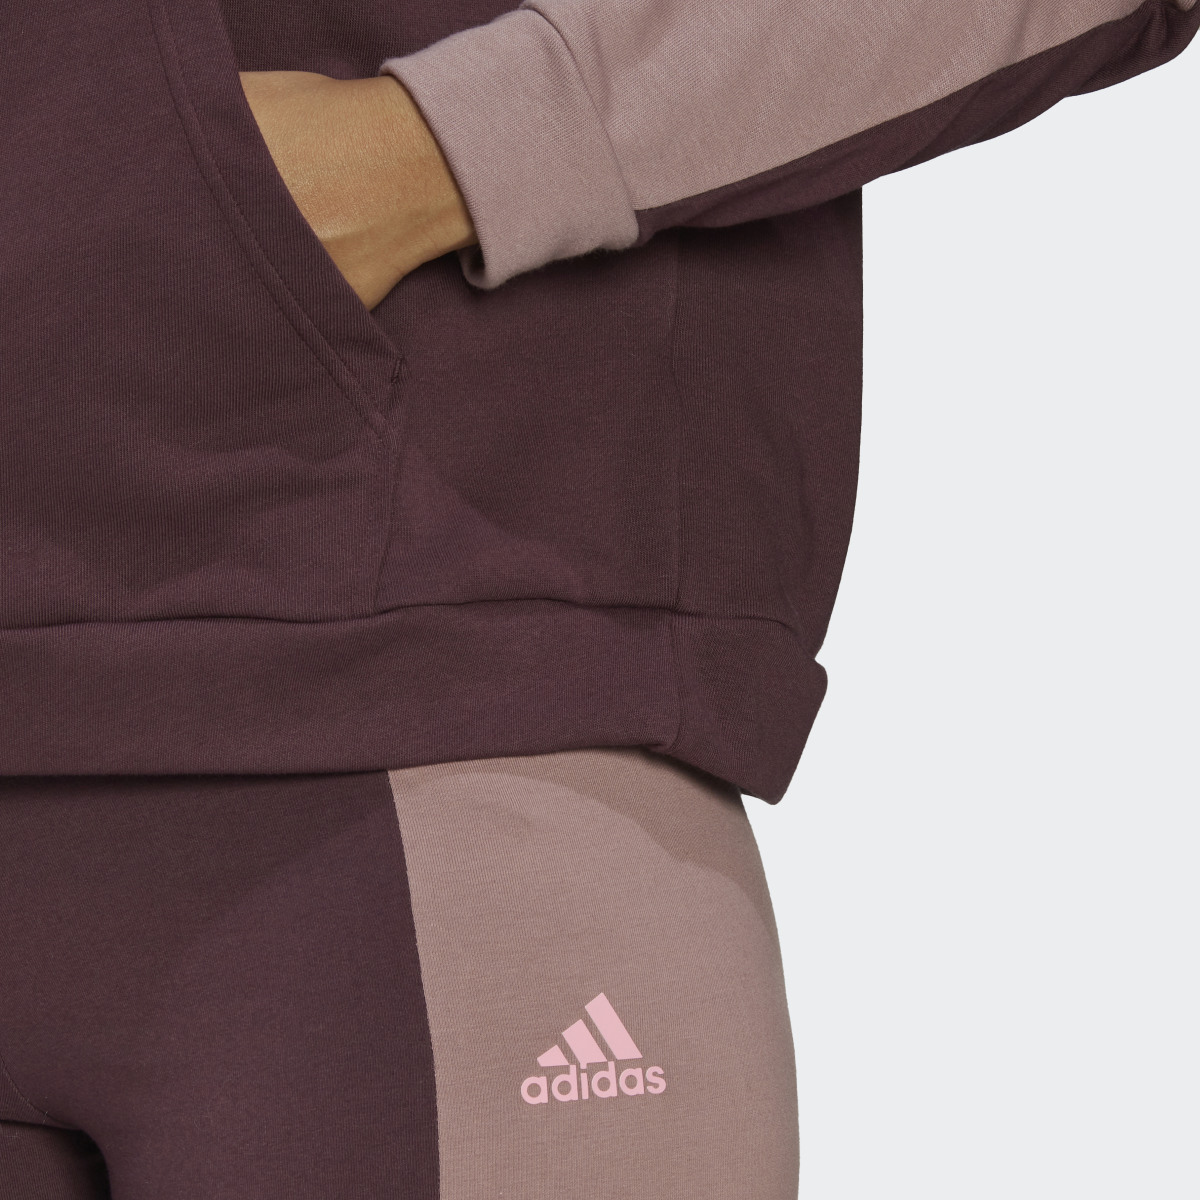 Adidas Half-Zip and Tights Track Suit. 7